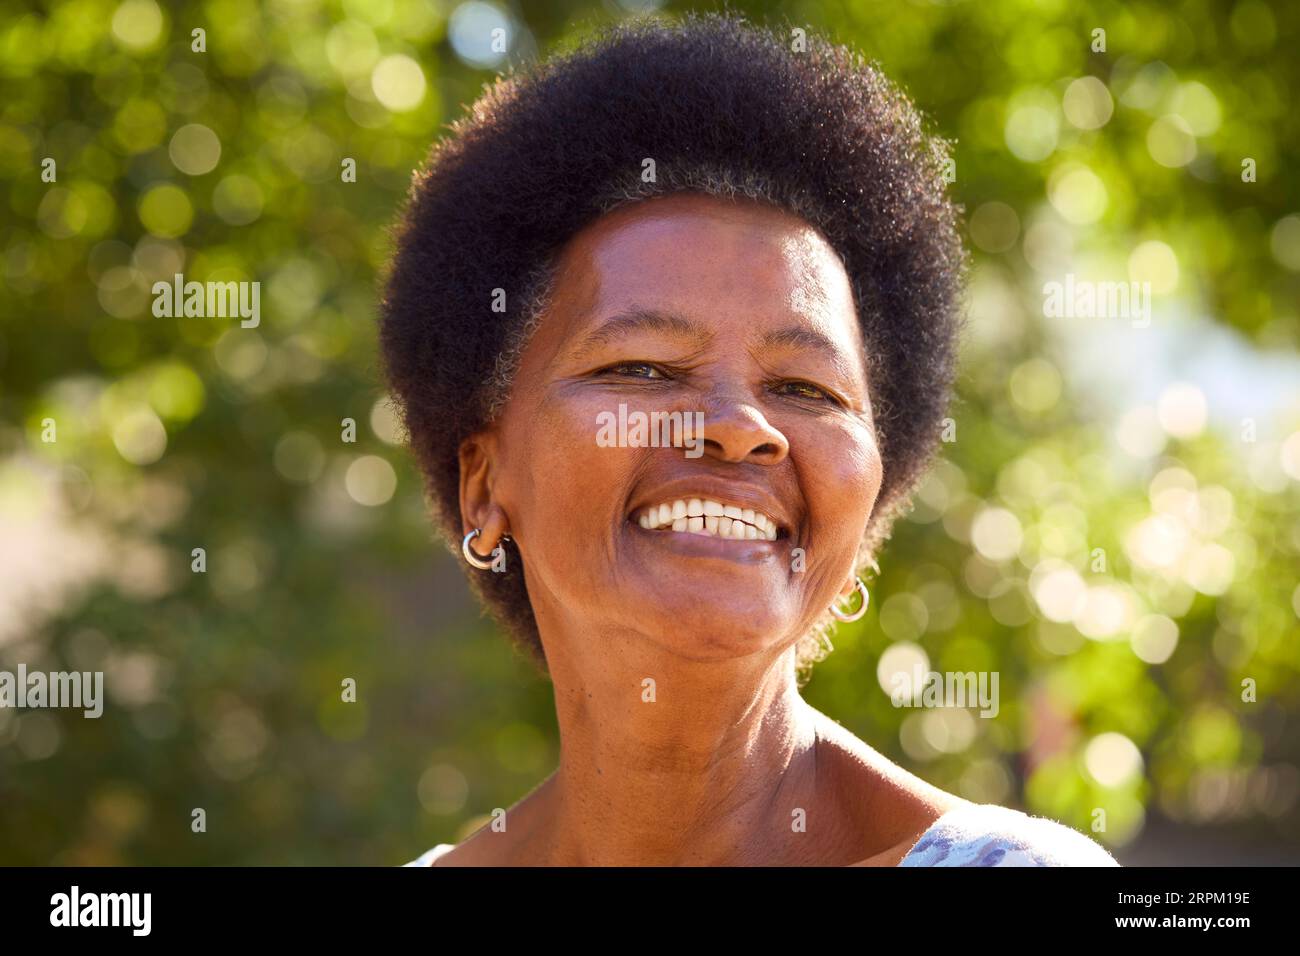 Portrait Of Smiling Senior Woman Standing Outdoors In Garden Park Or Countryside Stock Photo